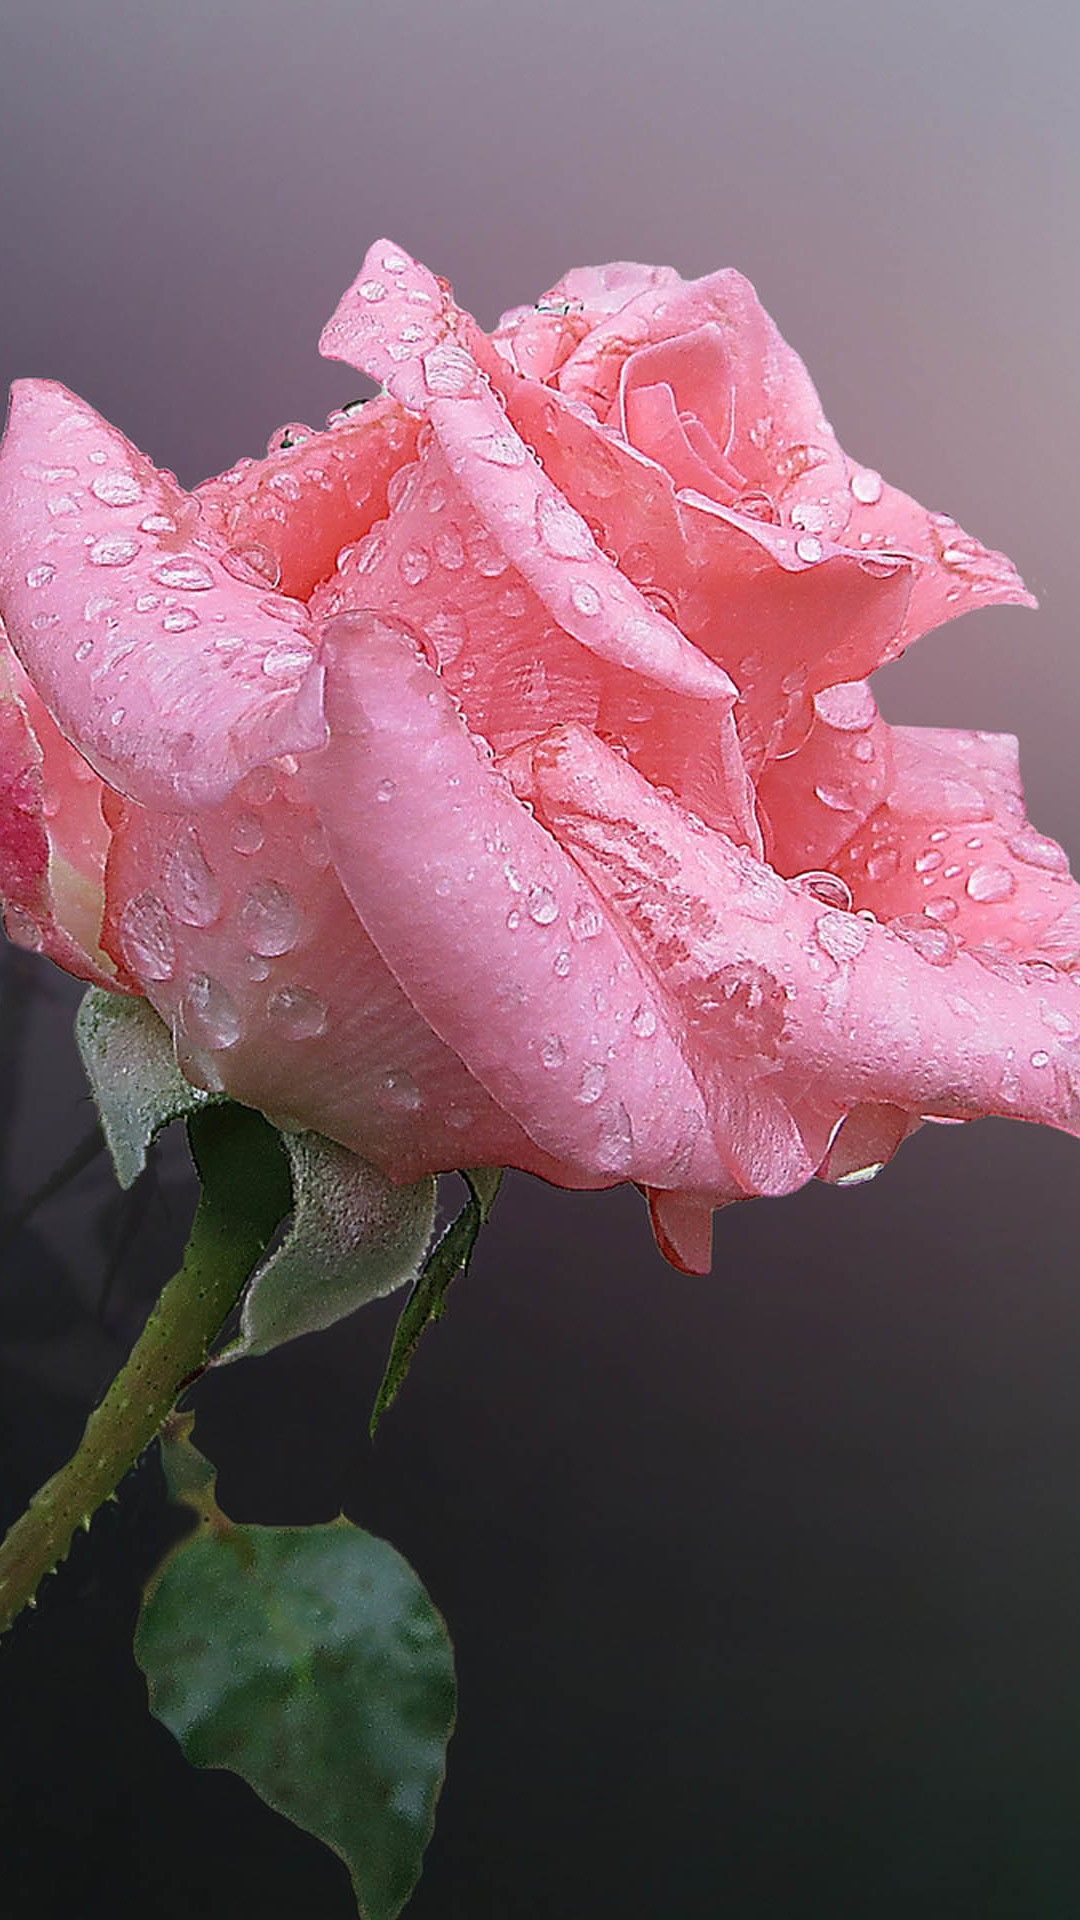 Pink Chinese Rose Flower With Water Drops iPhone 8 Wallpaper Free Download